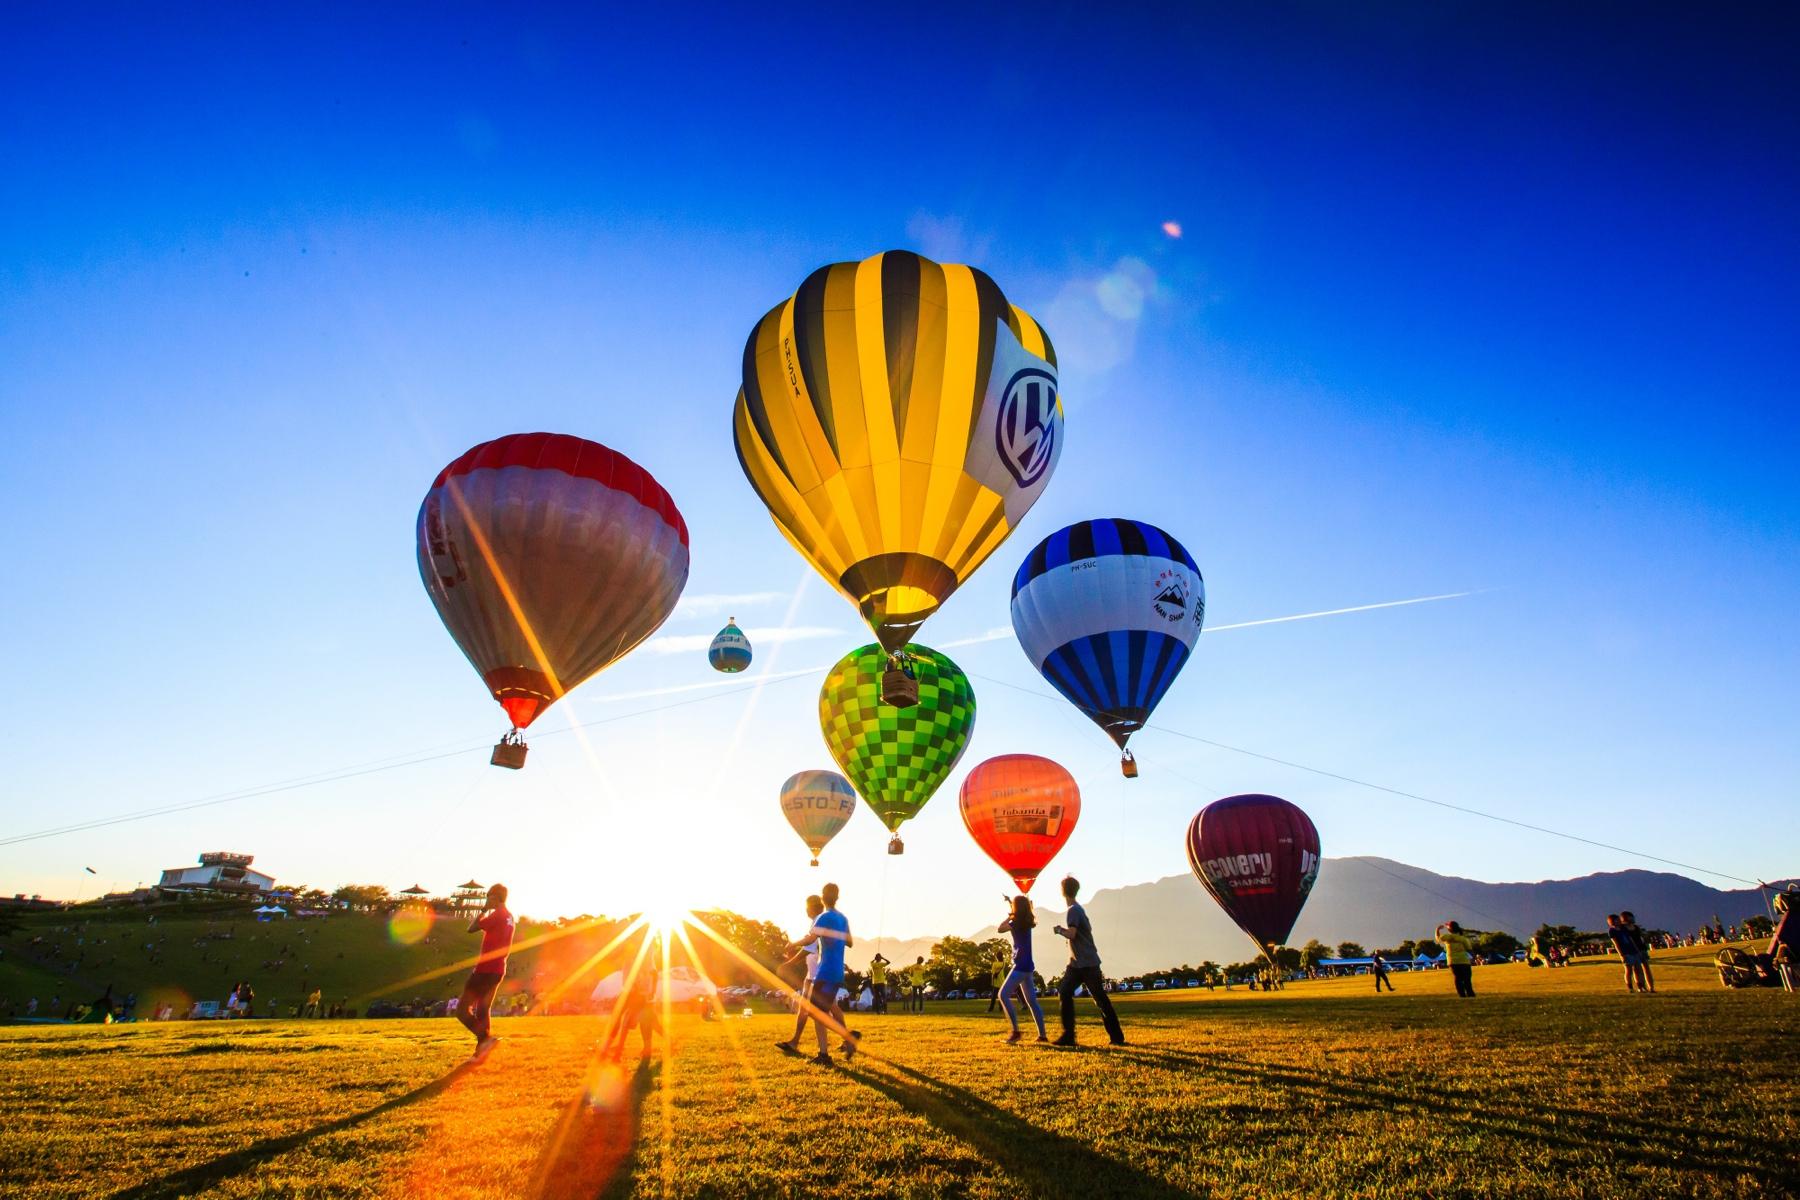 Fairy Tale World of Colorful Hot Air Balloons up in the Sky- Canon